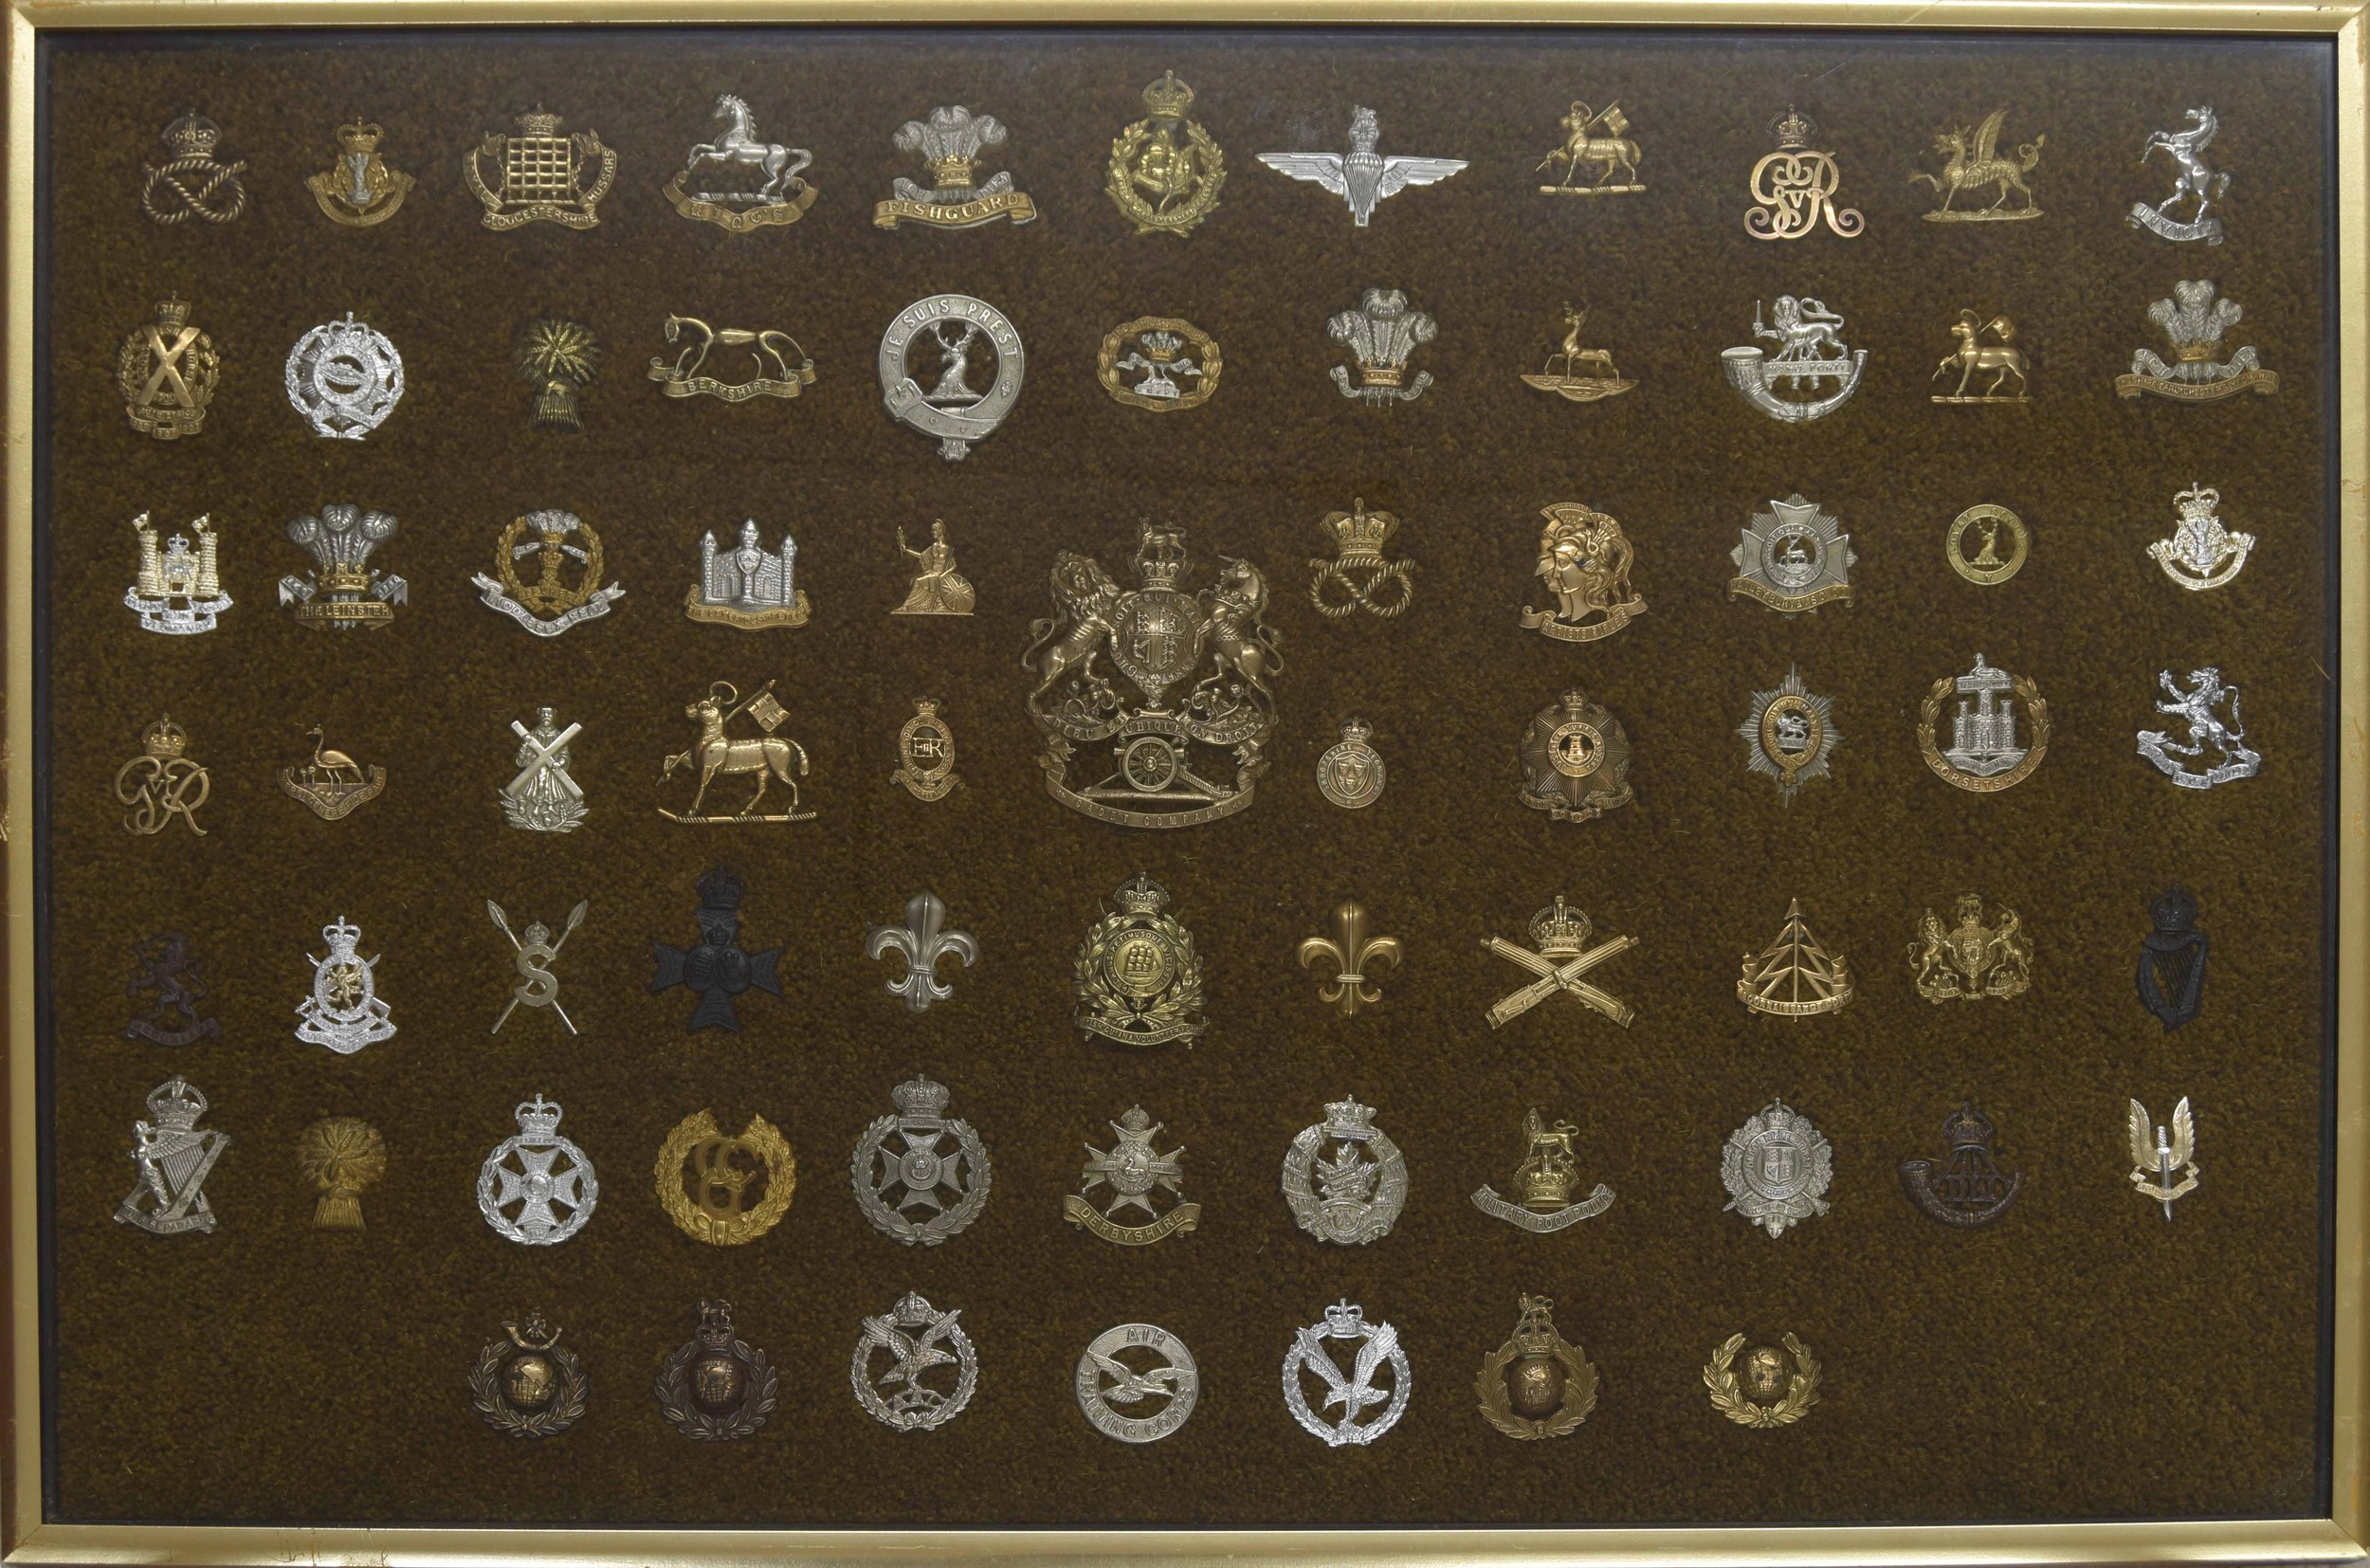 Military Regimental cap badges - large collection of seventy-two examples mounted in a display